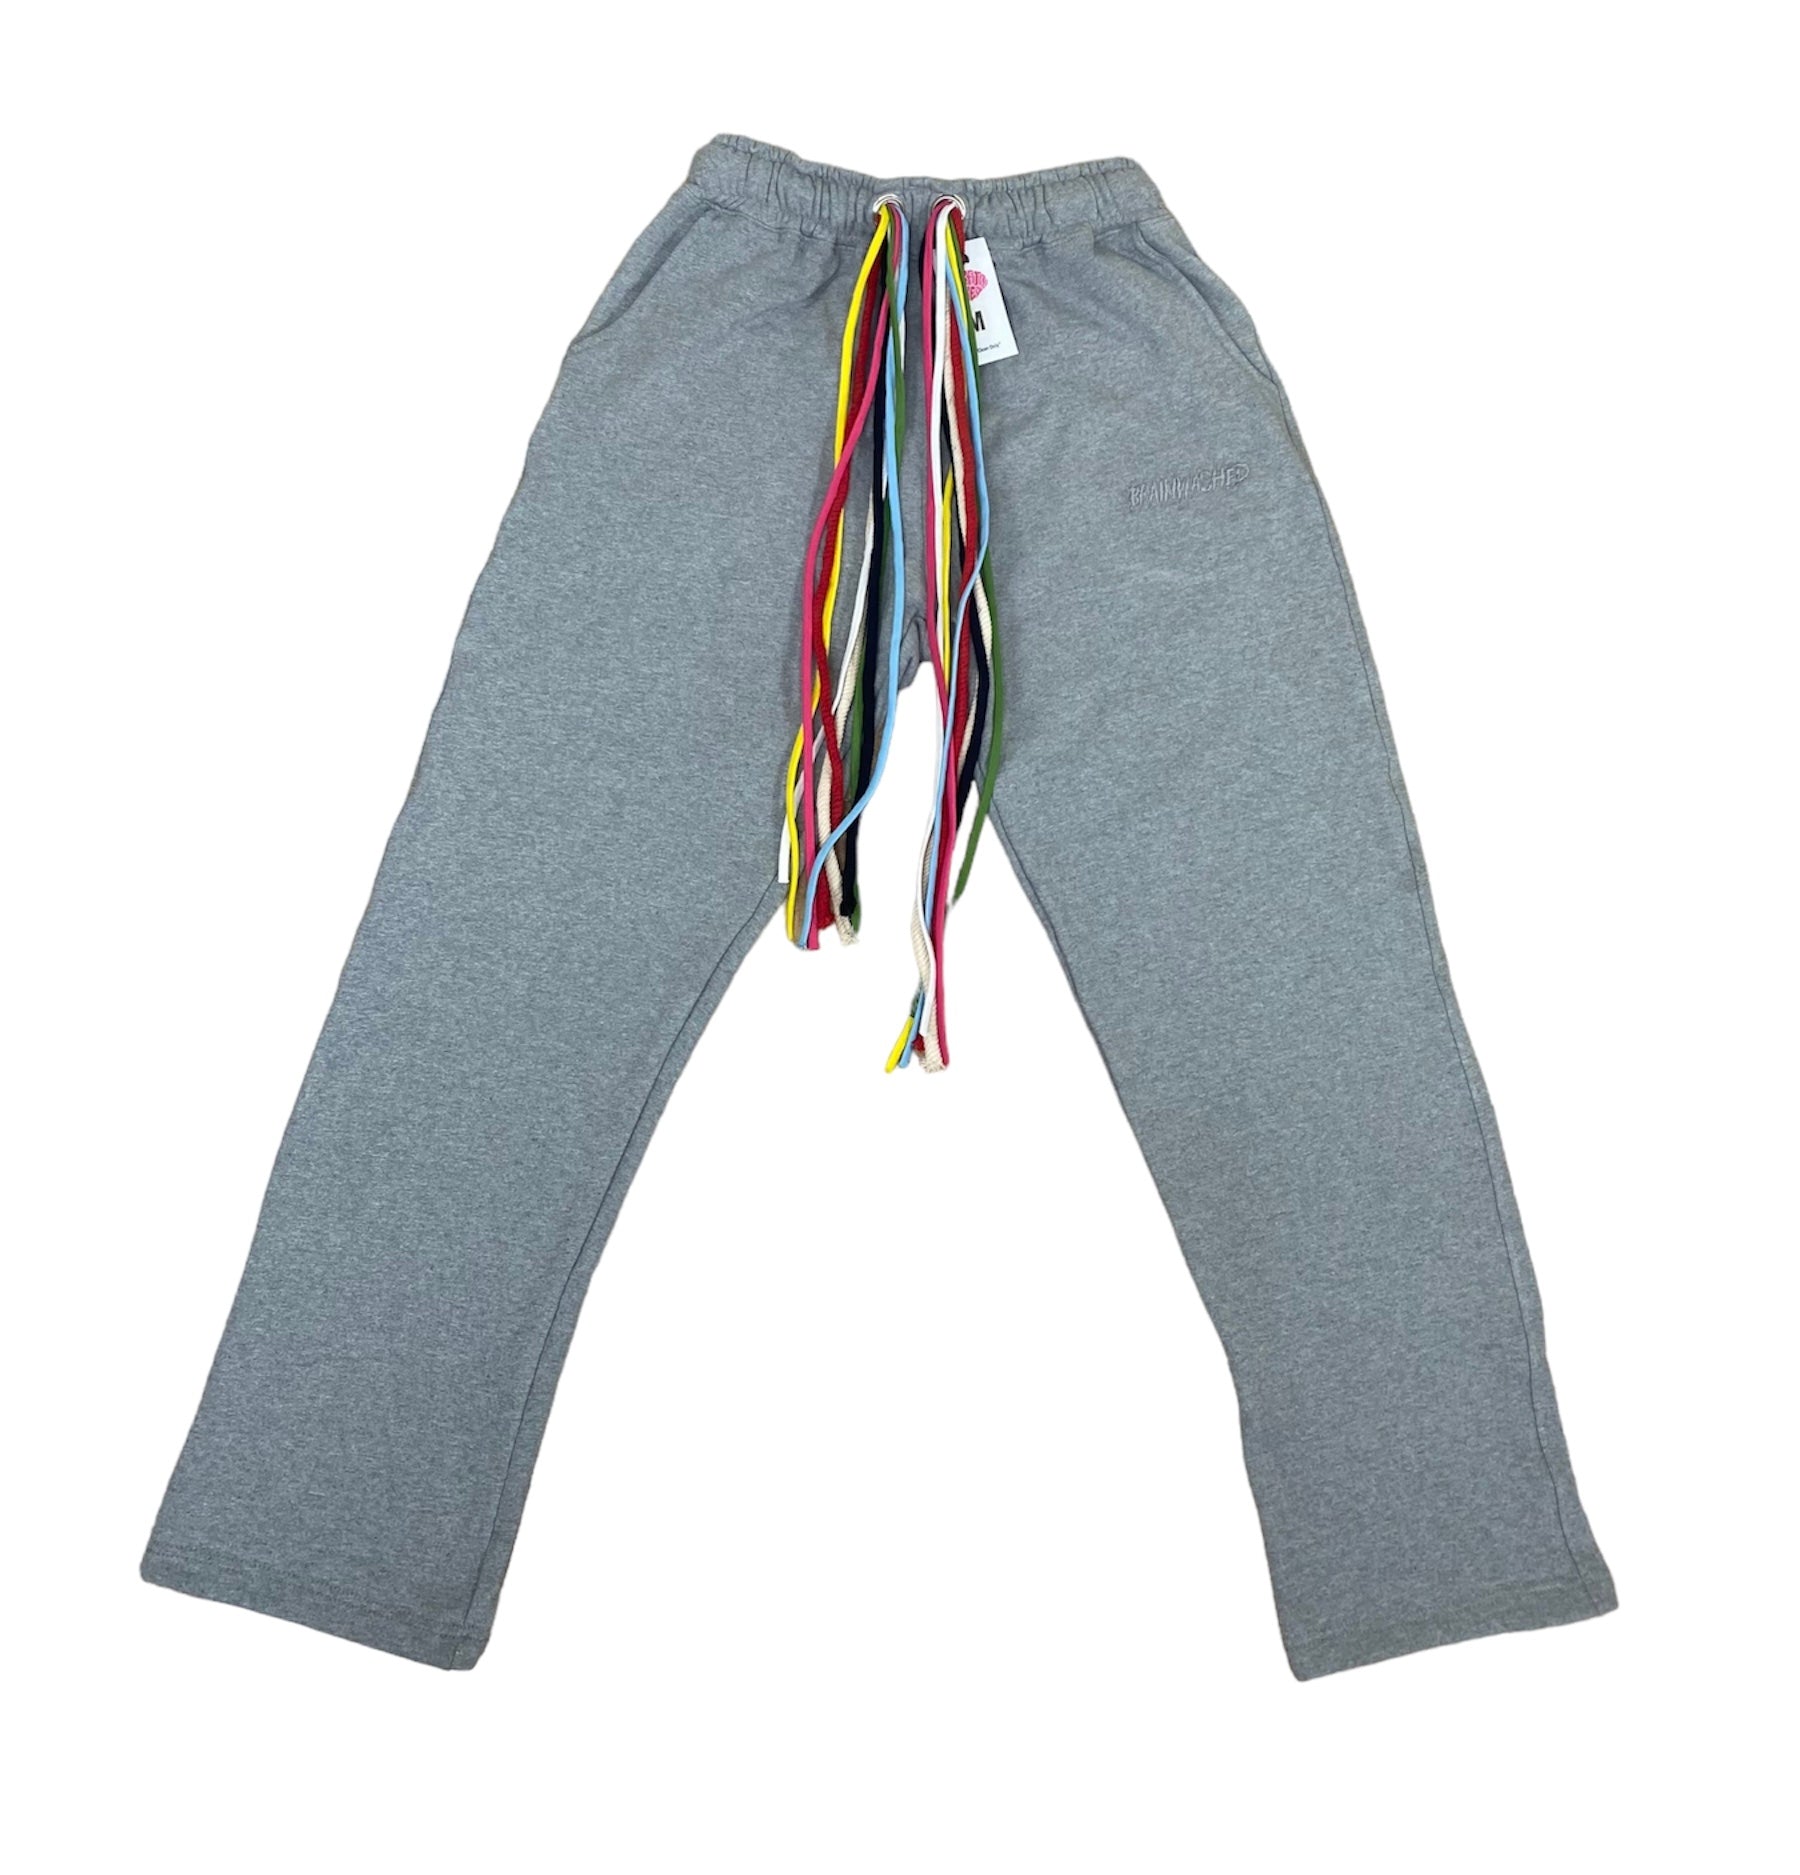 Multicord Grey Color Sweatpants – BRAINWASHED